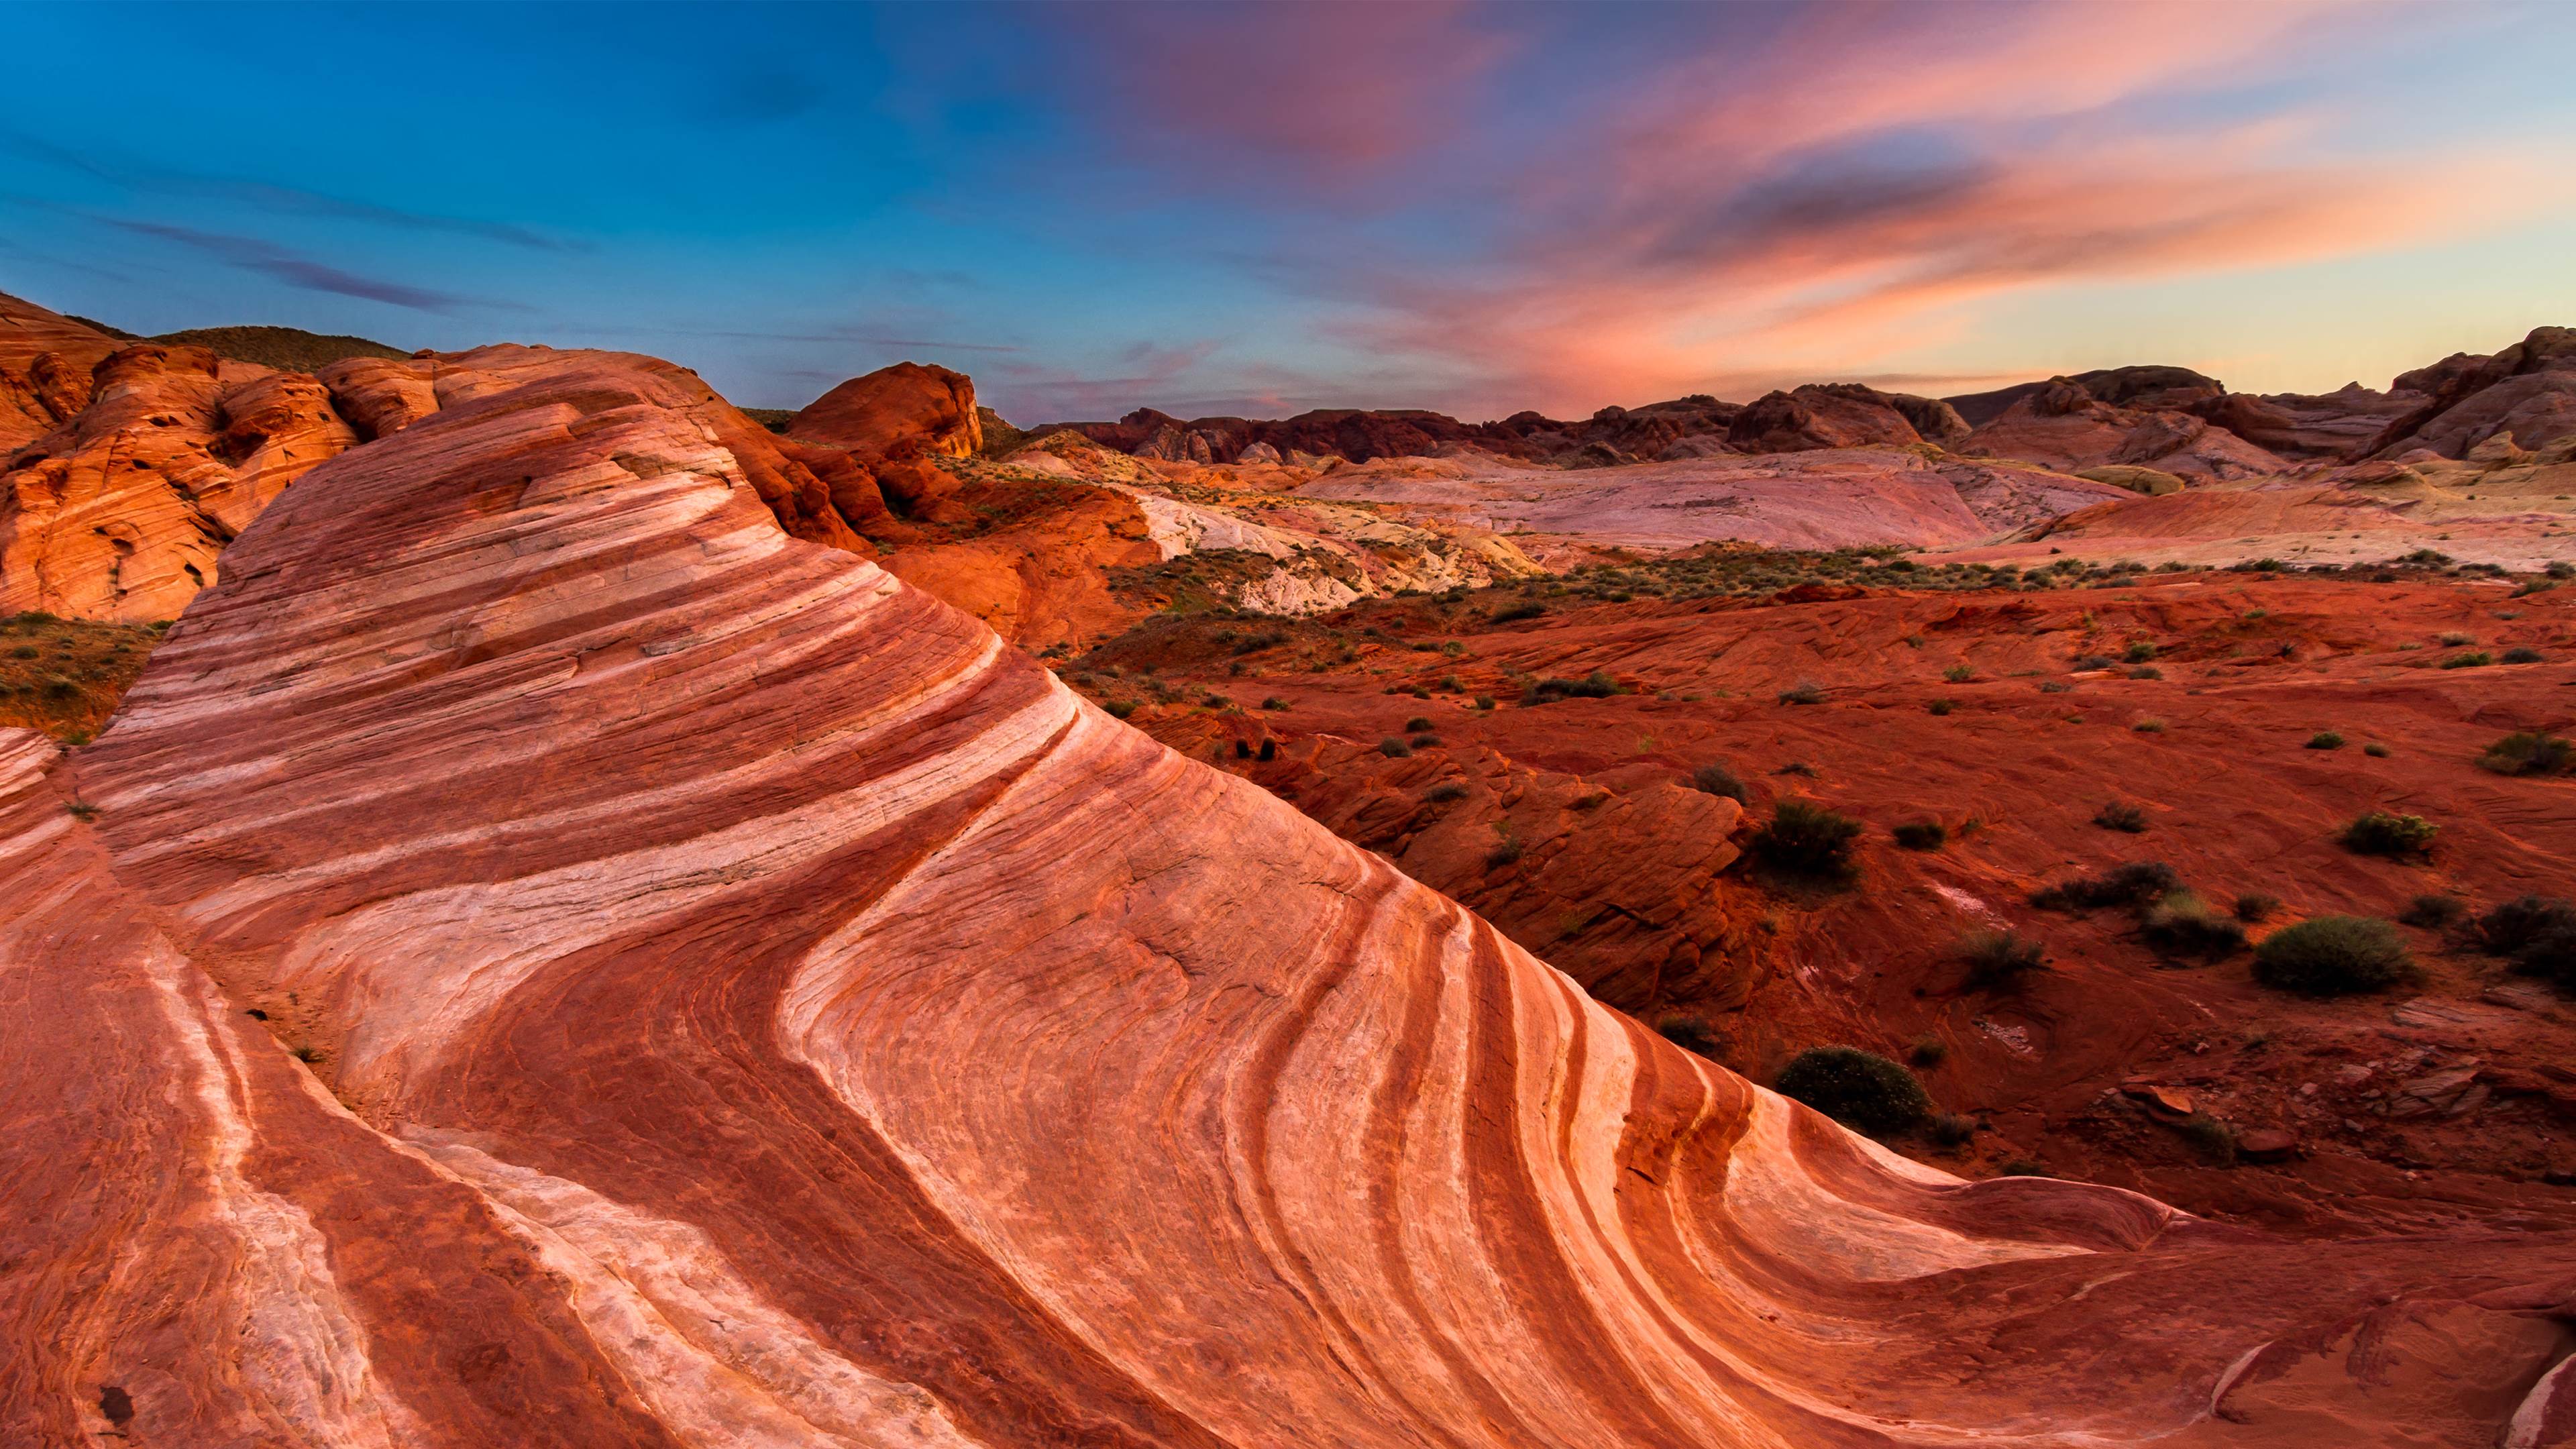 Flowing through Valley of Fire